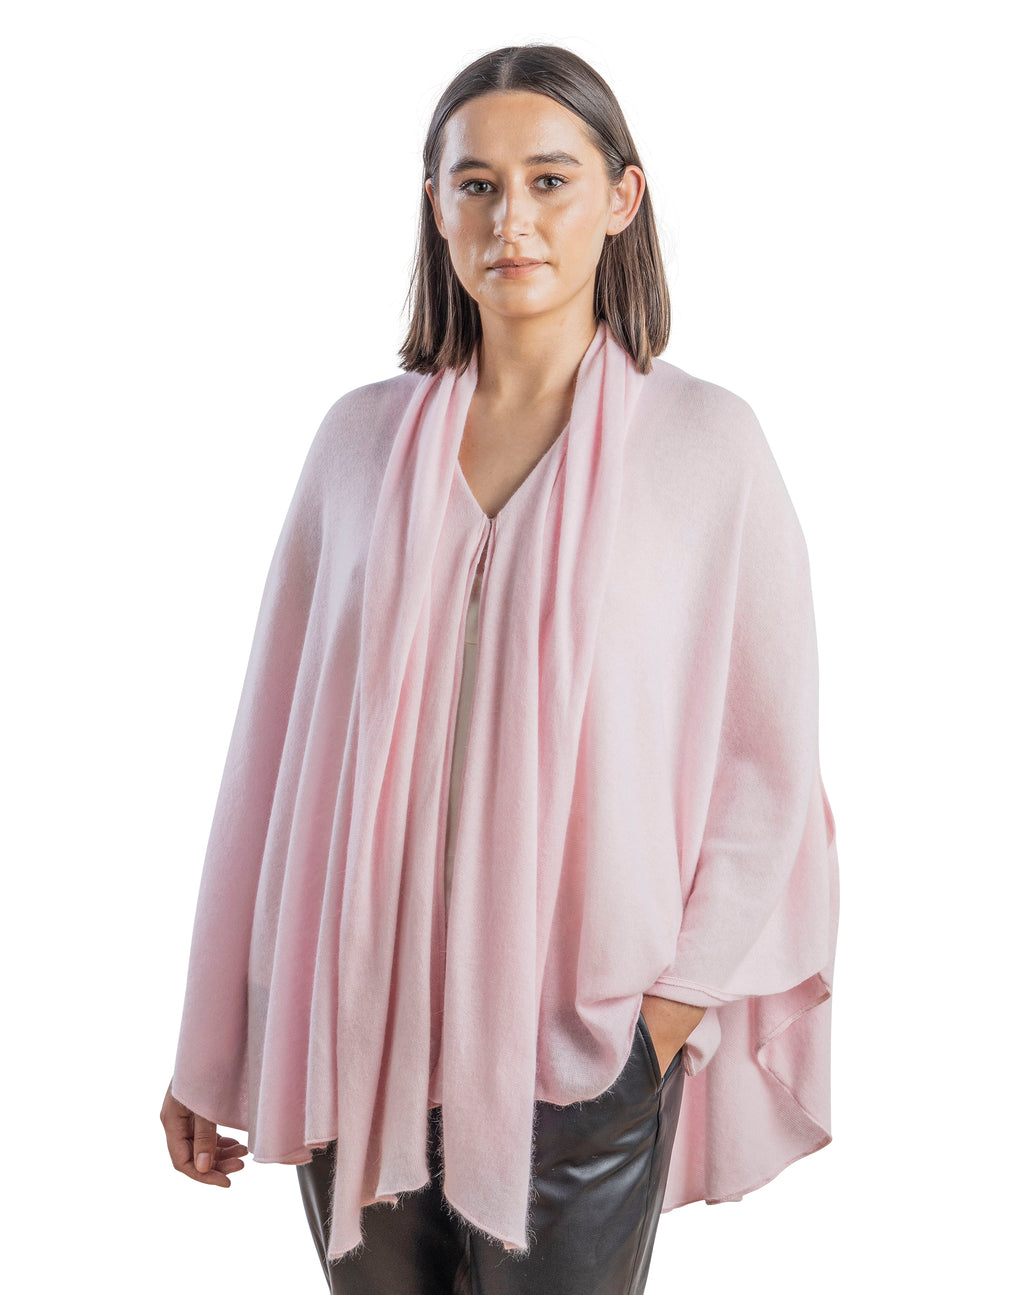 Baby Pink Cape like Poncho.